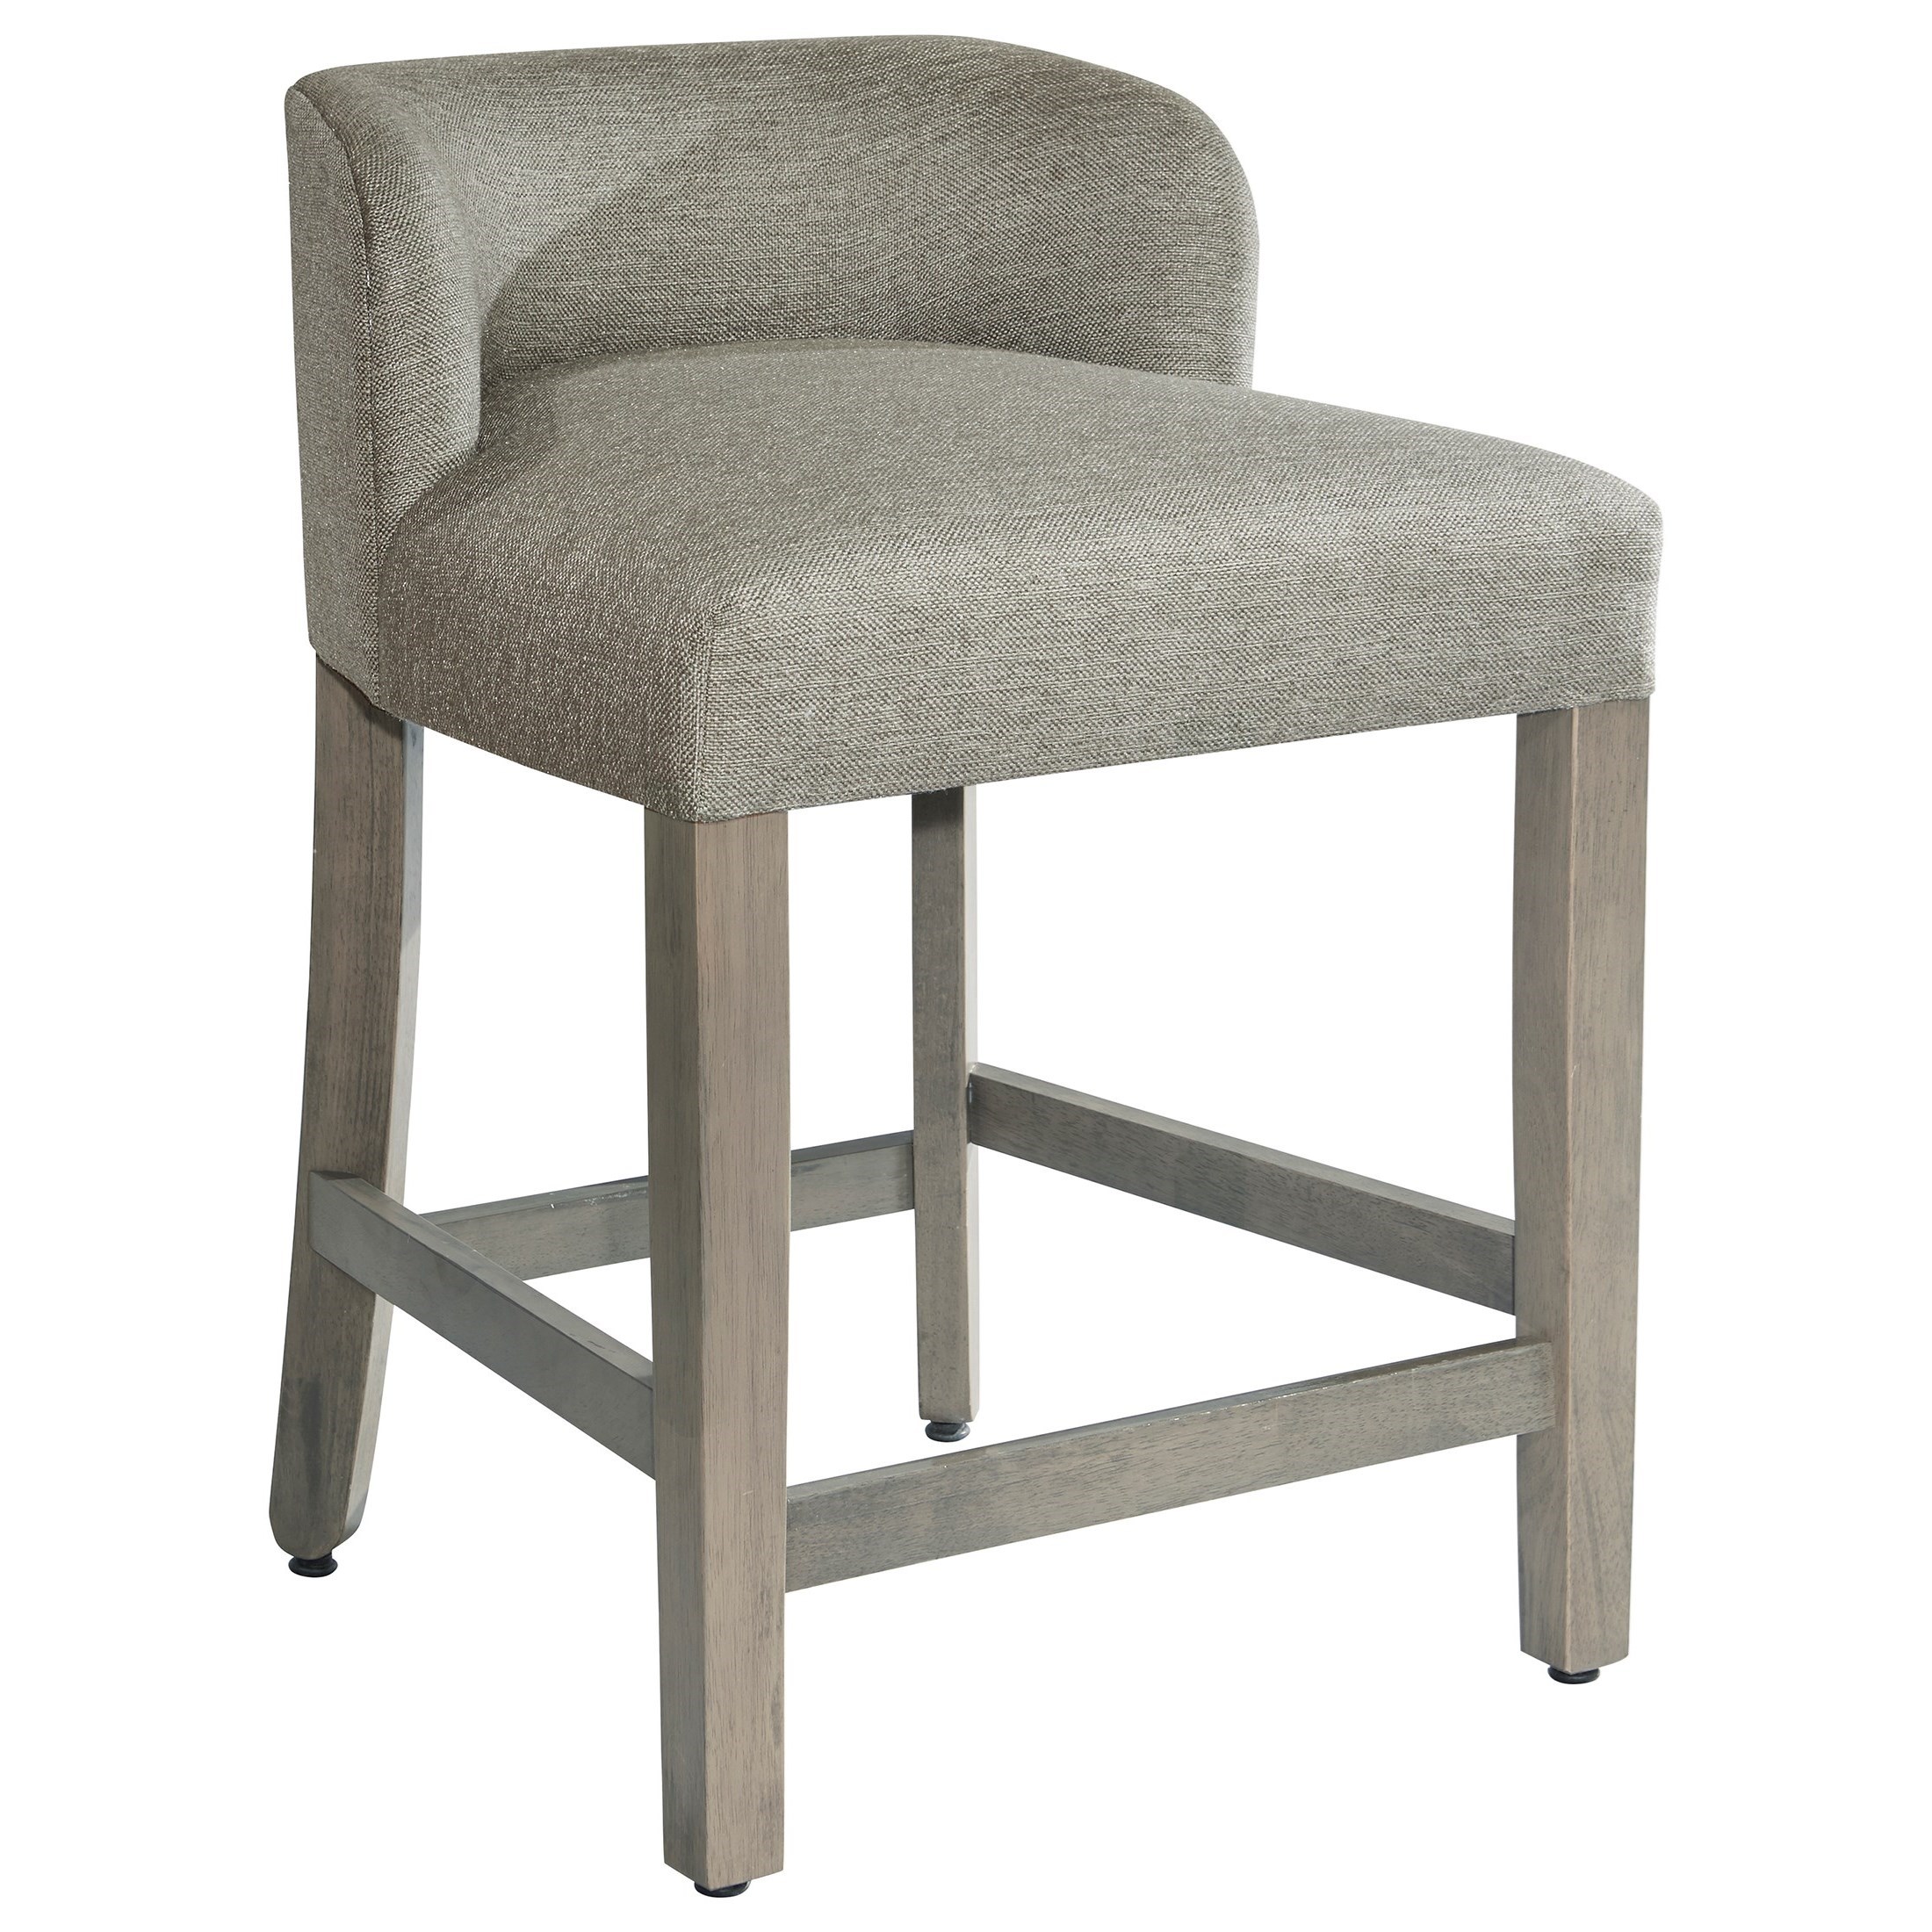 Erin Upholstered Counter Stool with Low Back